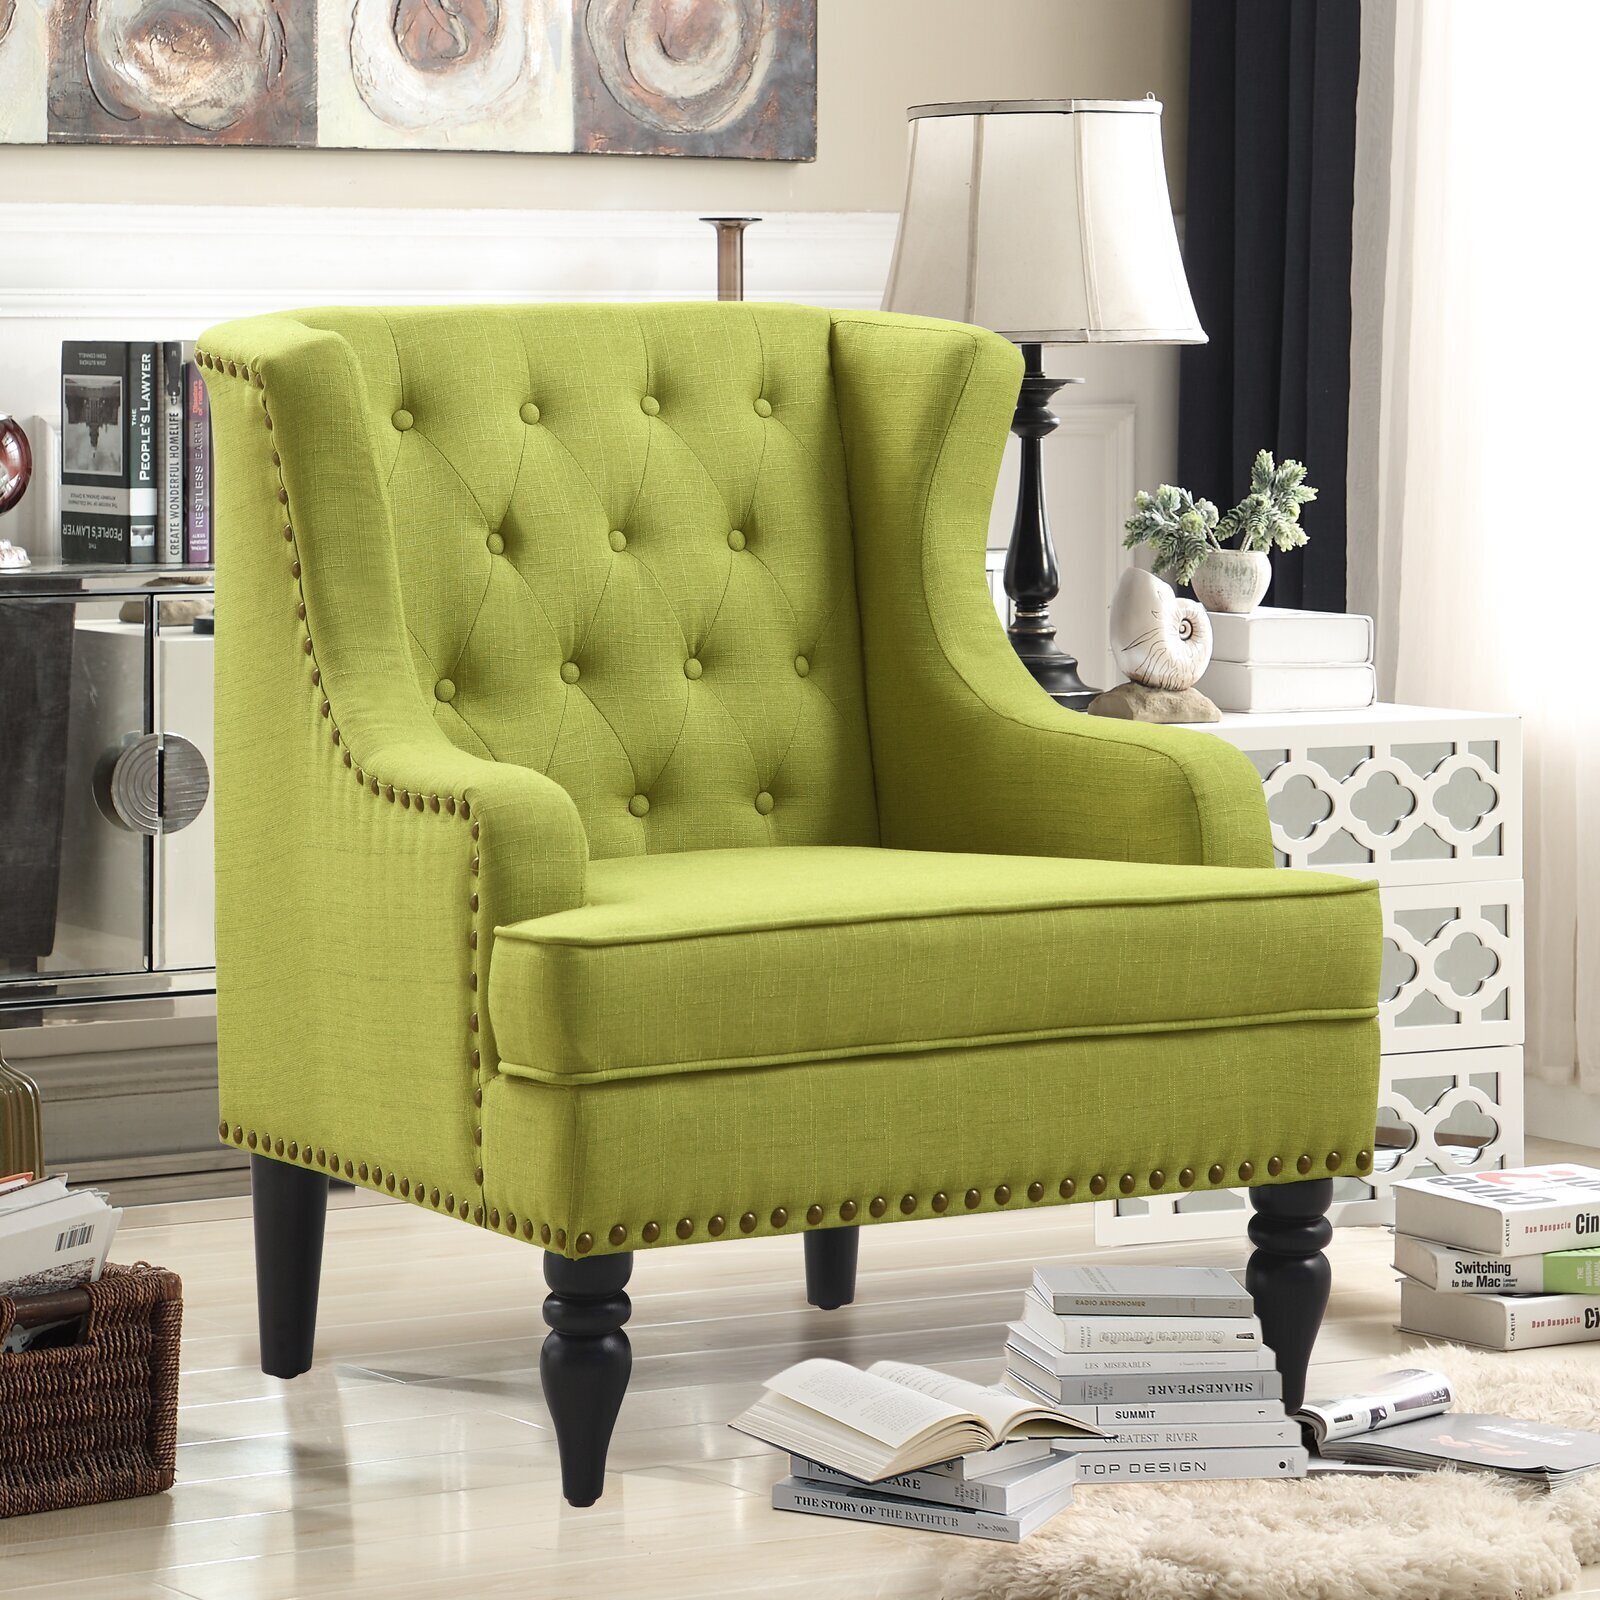 Tufted Lime Green Armchair